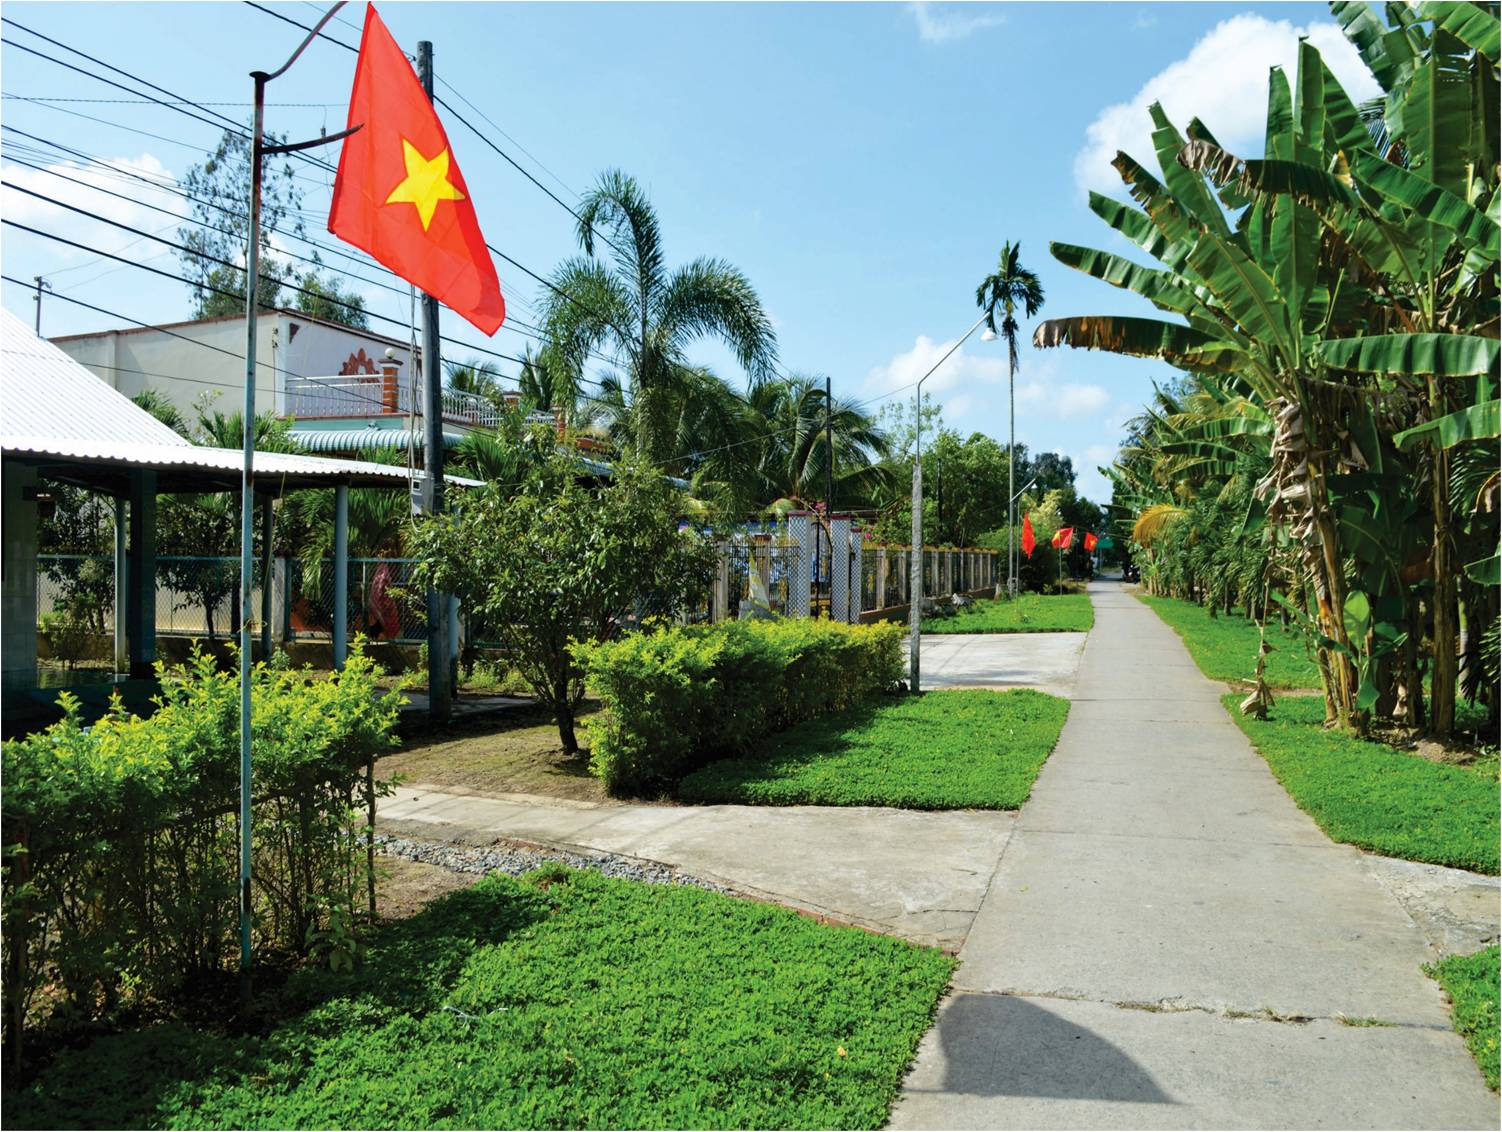 Vietnam's criteria for telecommunications and Internet services of new rural communes